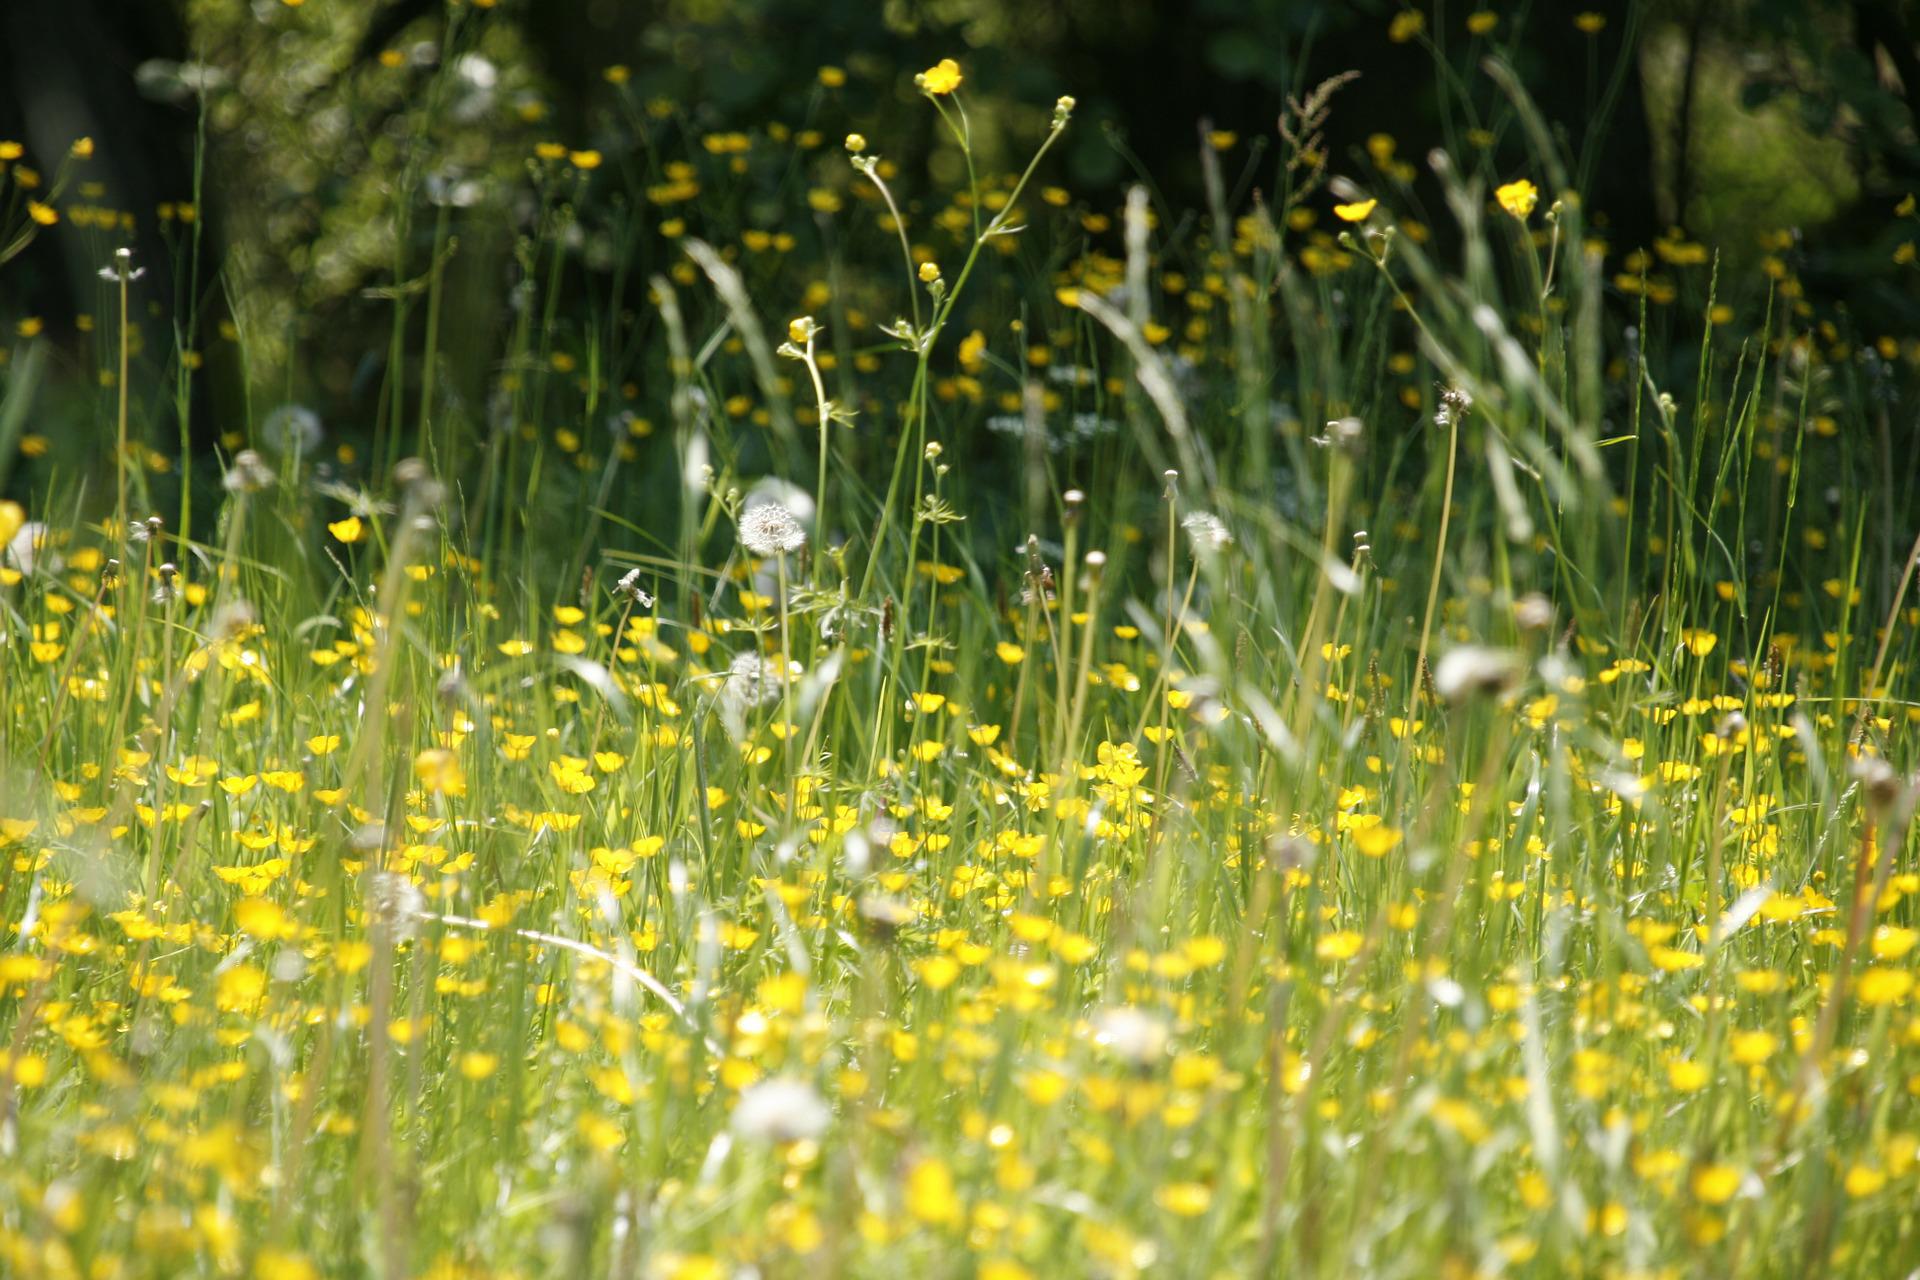 NEWS | Bad news for hay fever sufferers with pollen levels set to become ‘high’ as we head towards the Bank Holiday weekend